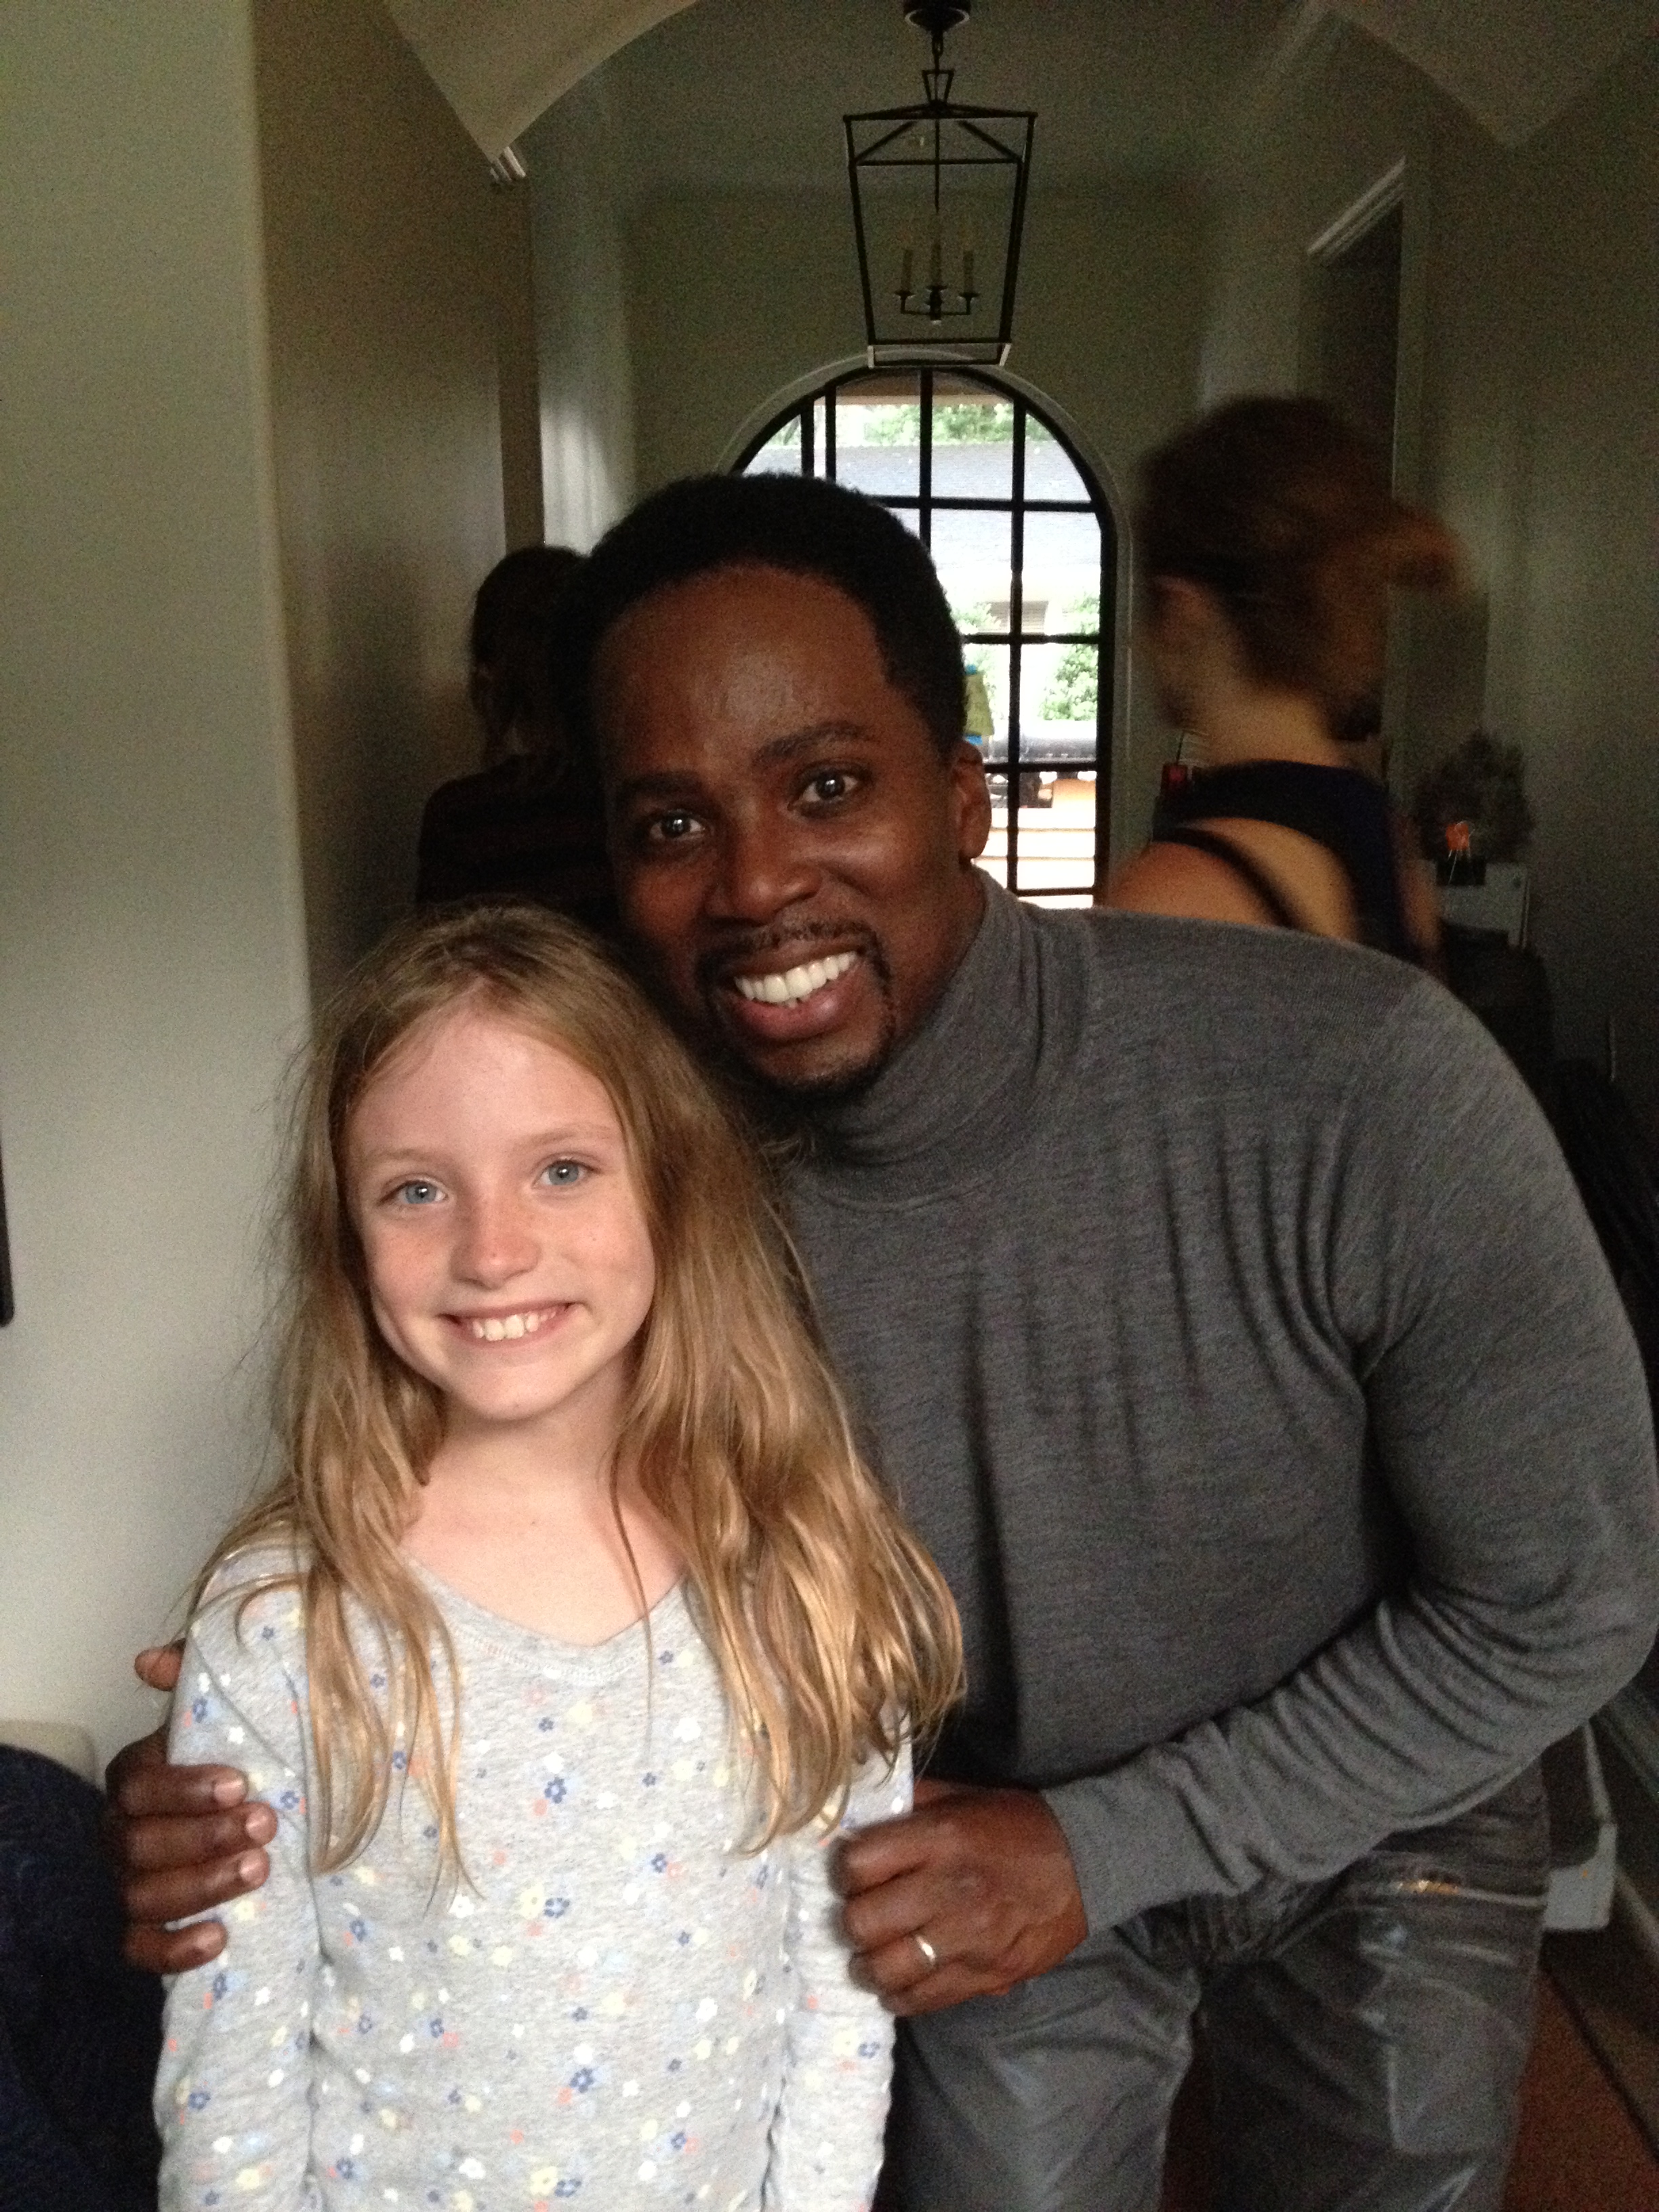 Harold Perrineau and Christa Beth Campbell on the set of Constantine.